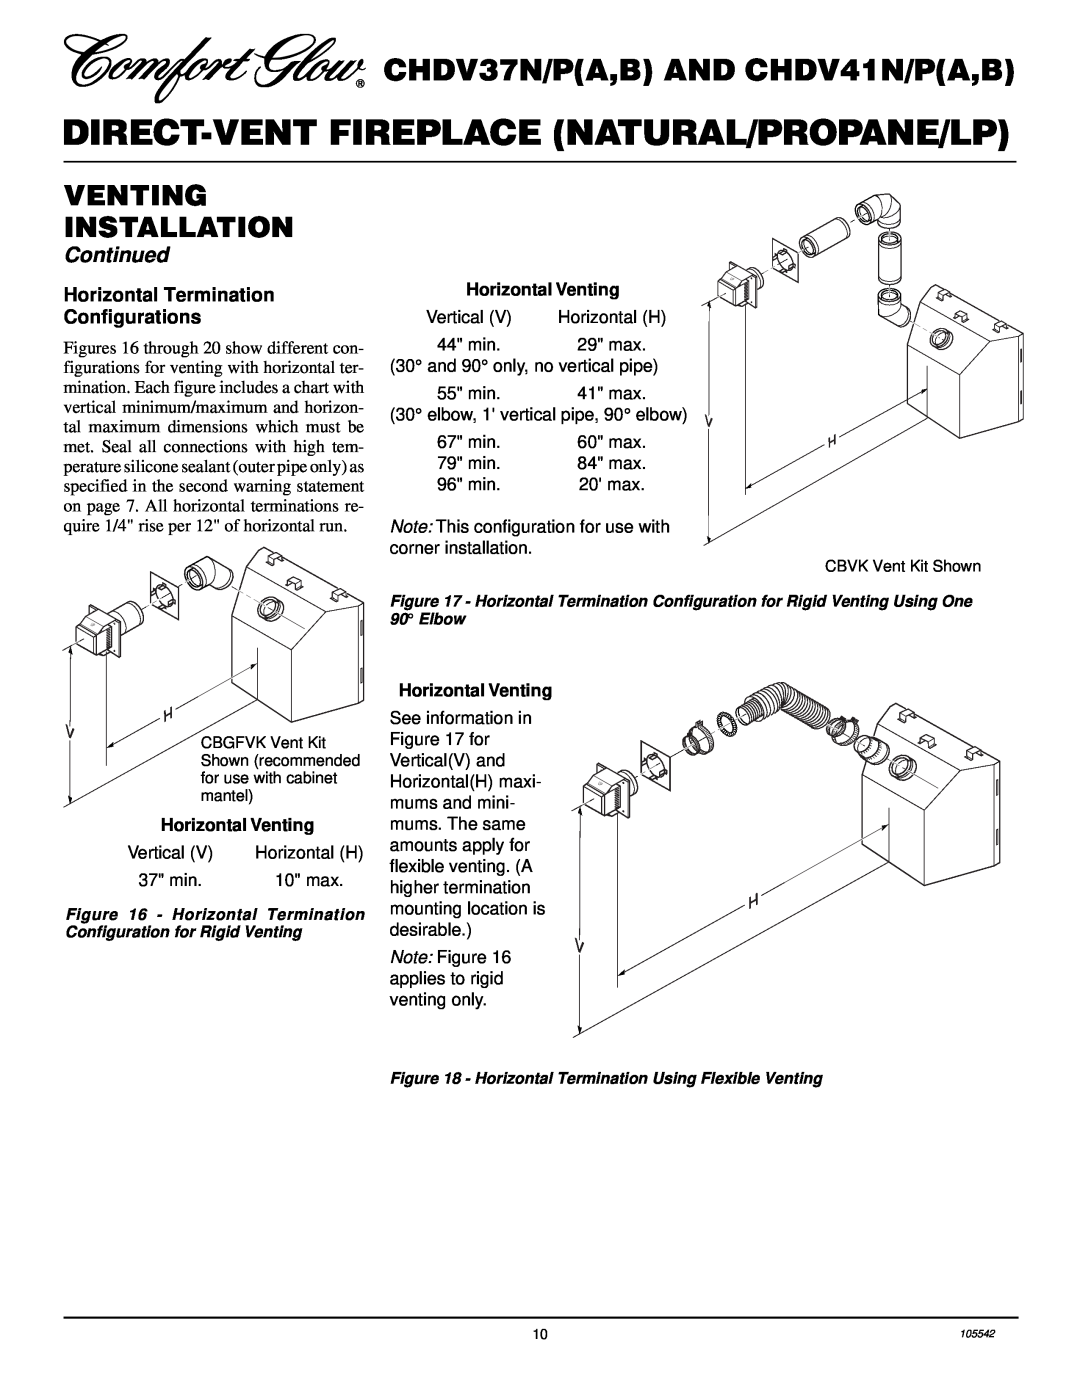 Desa CHDV37N/P Horizontal Termination Configurations, Direct-Vent Fireplace Natural/Propane/Lp, Venting Installation 